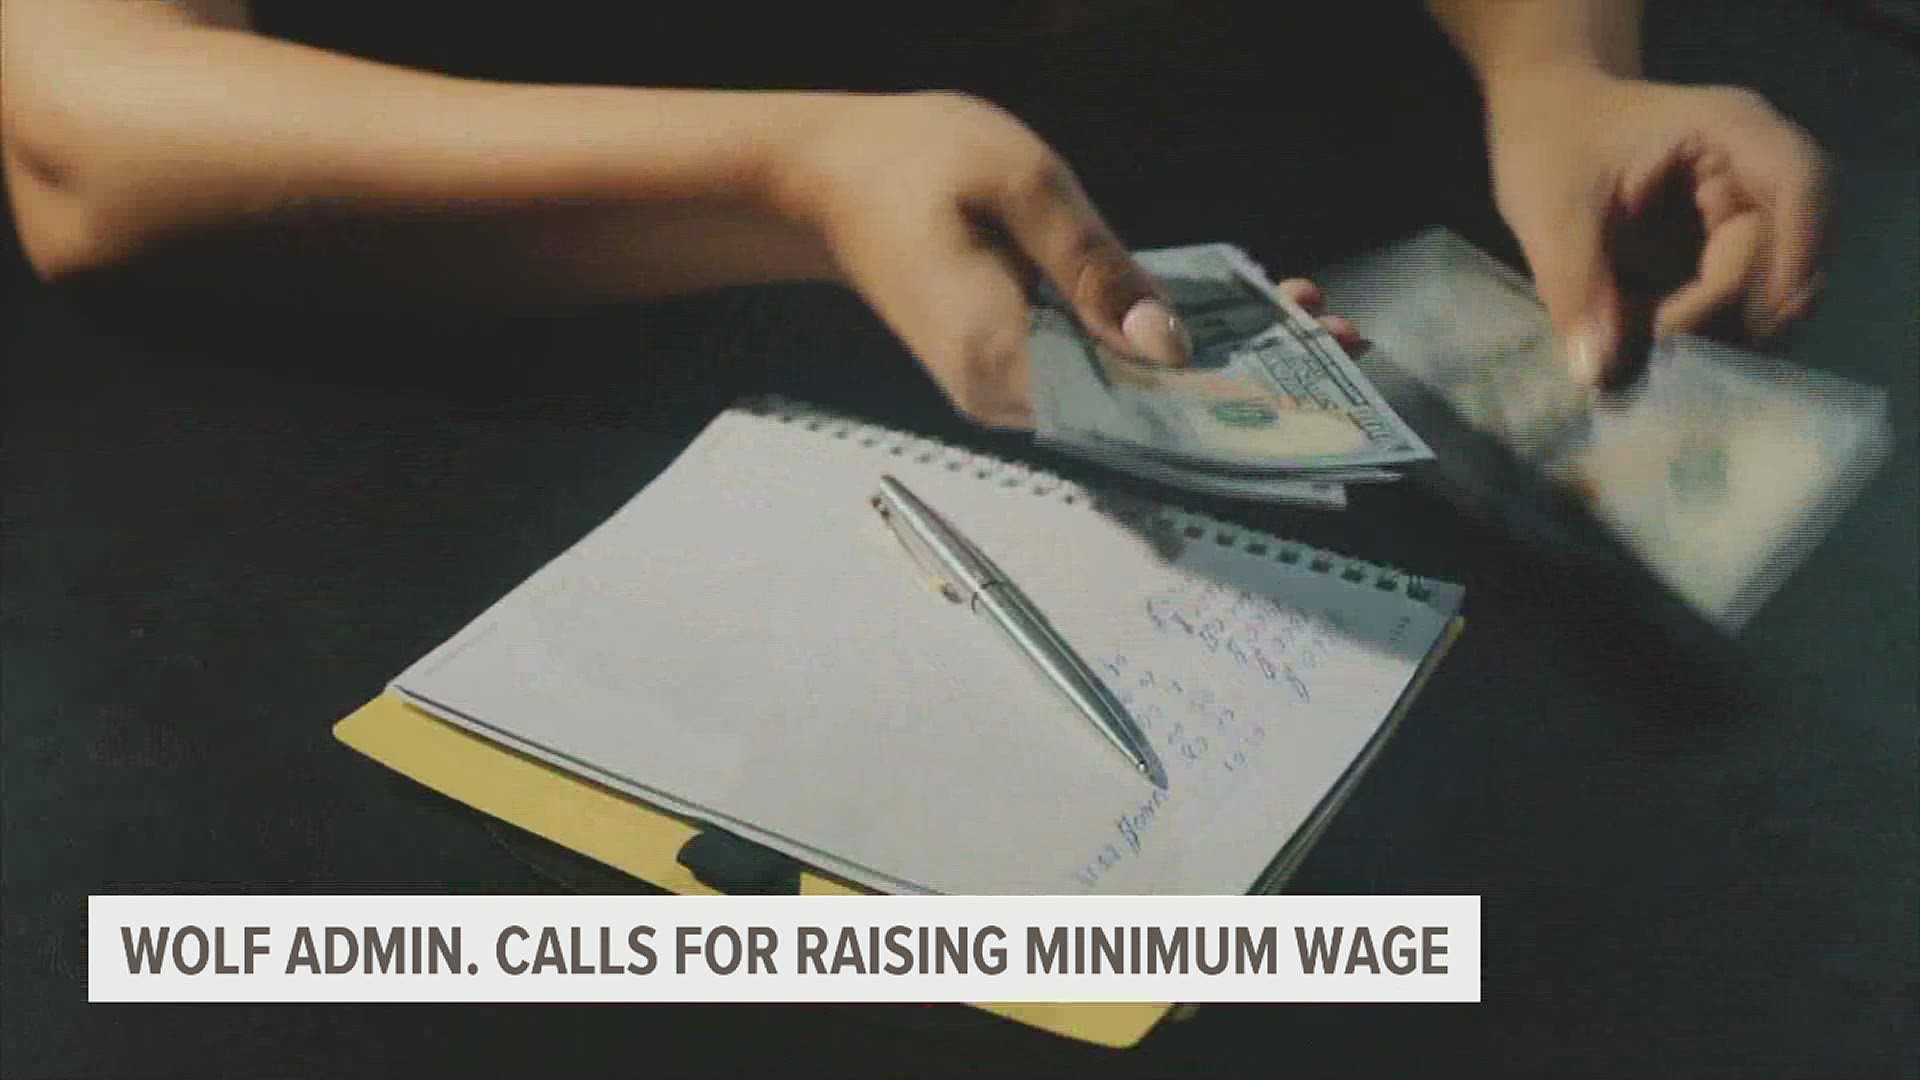 The Wolf administration called to raise the minimum wage to $12 an hour with a pathway to $15 an hour by 2027.